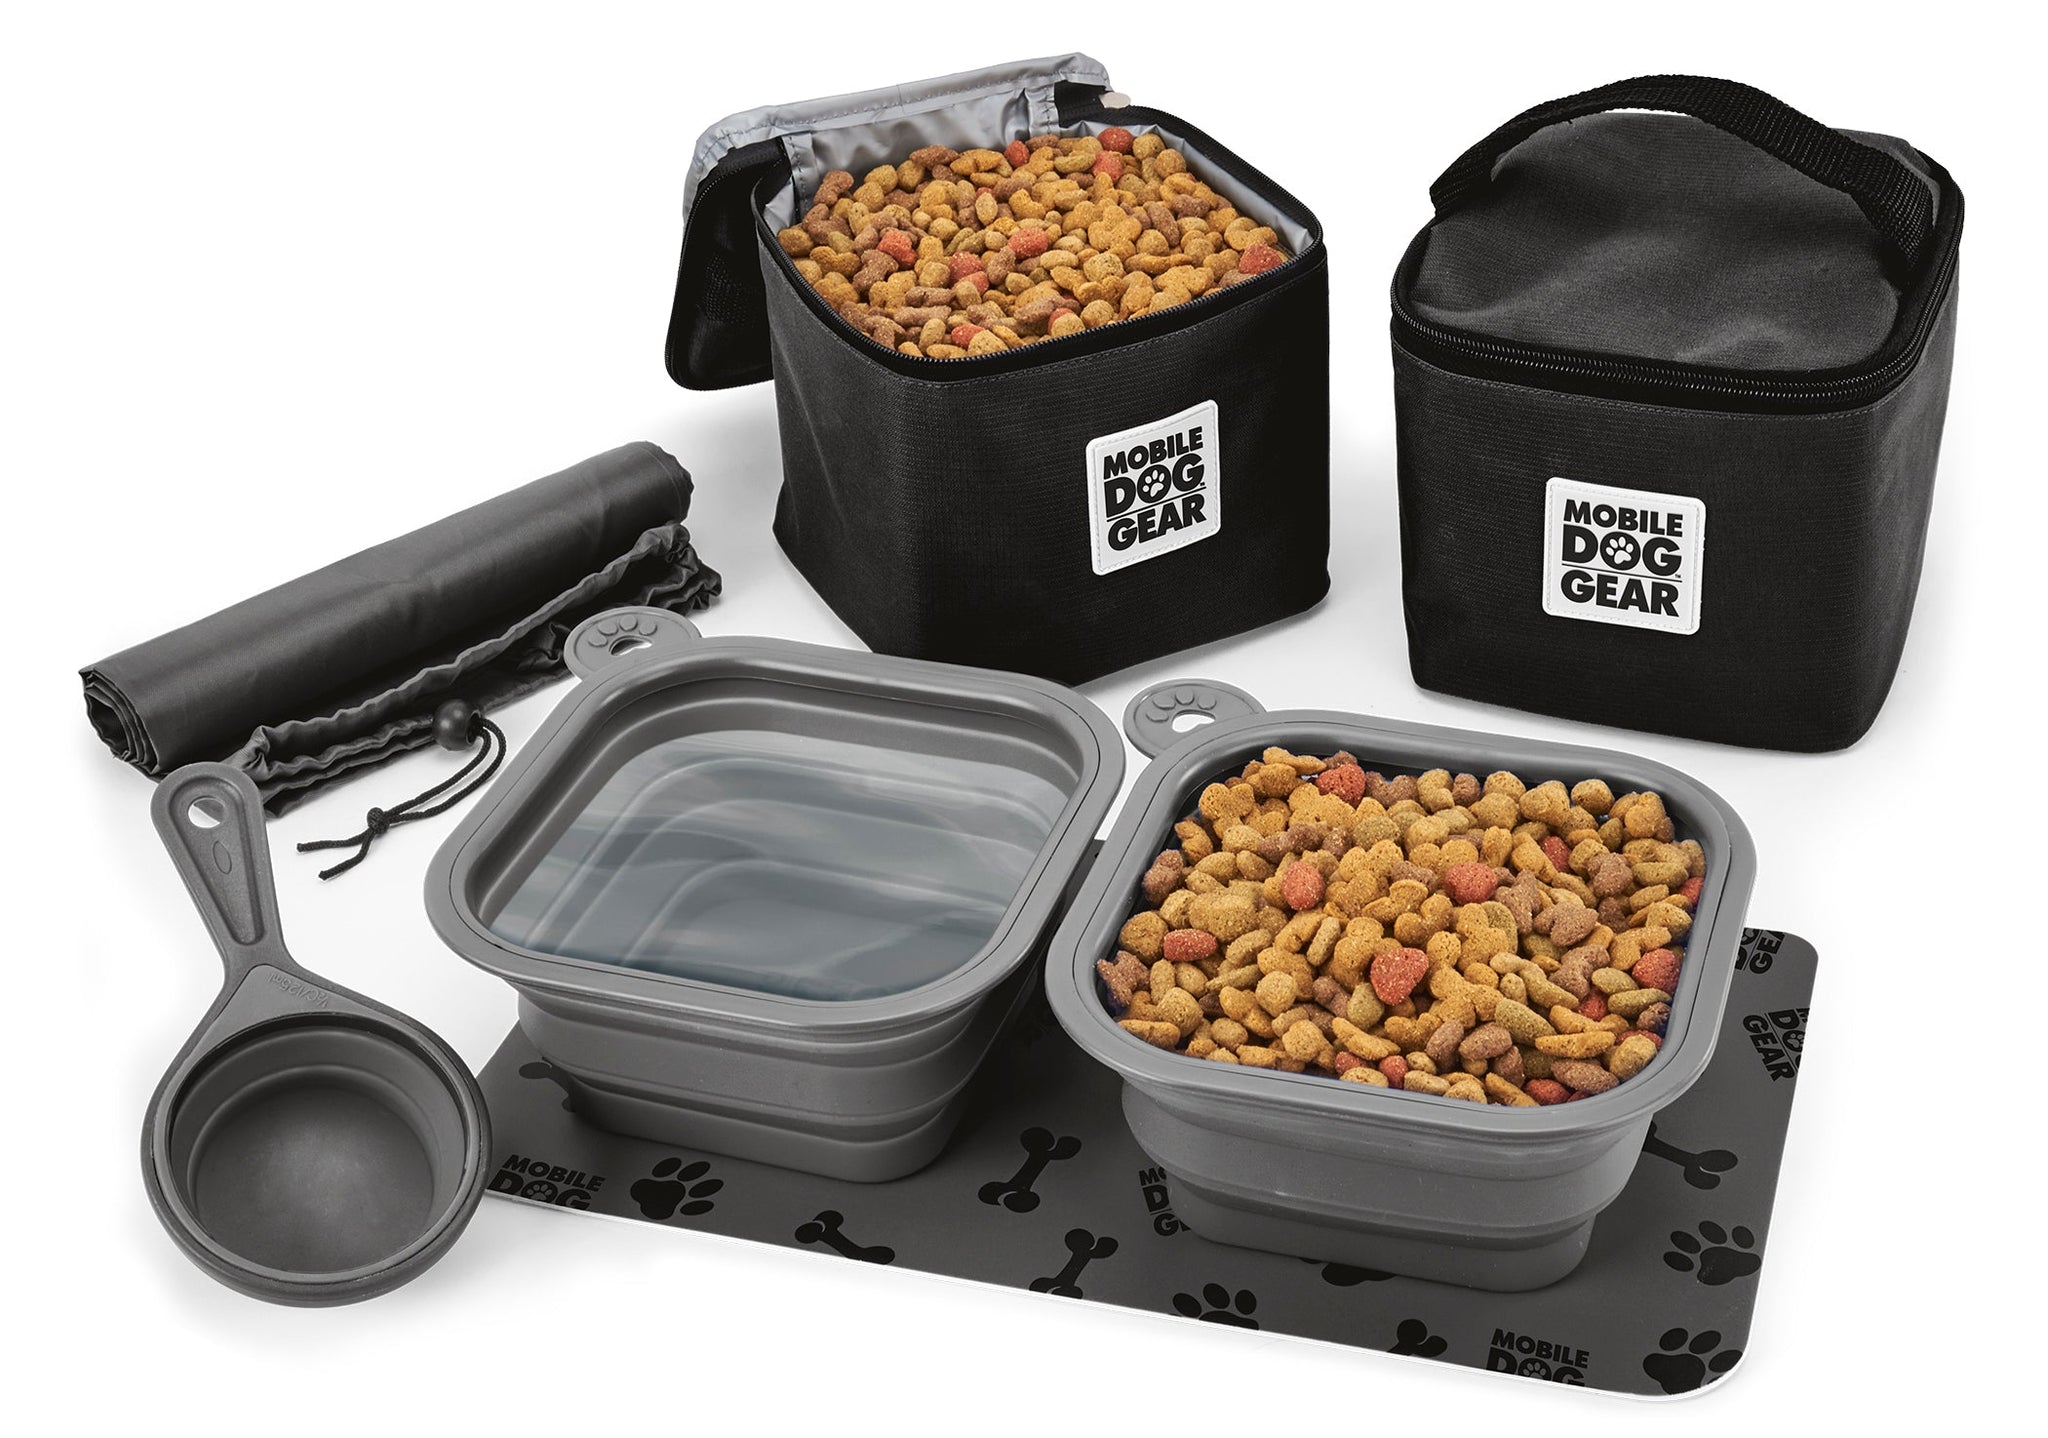 lined carriers can be used for food or treats, and can each hold up to 15 cups of food.